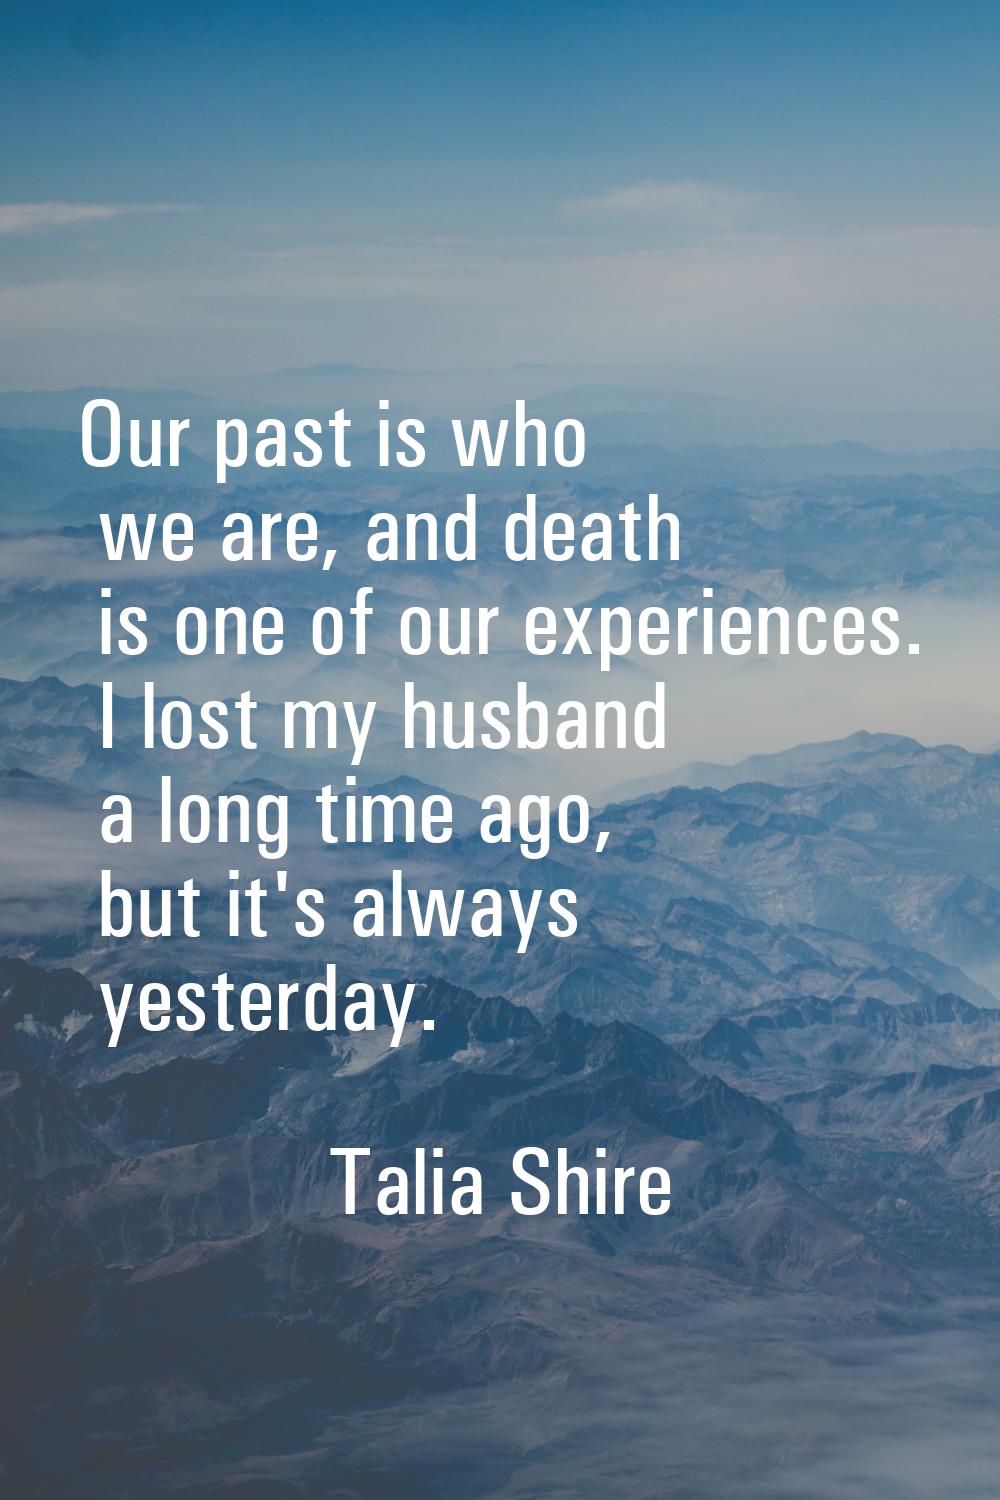 Our past is who we are, and death is one of our experiences. I lost my husband a long time ago, but